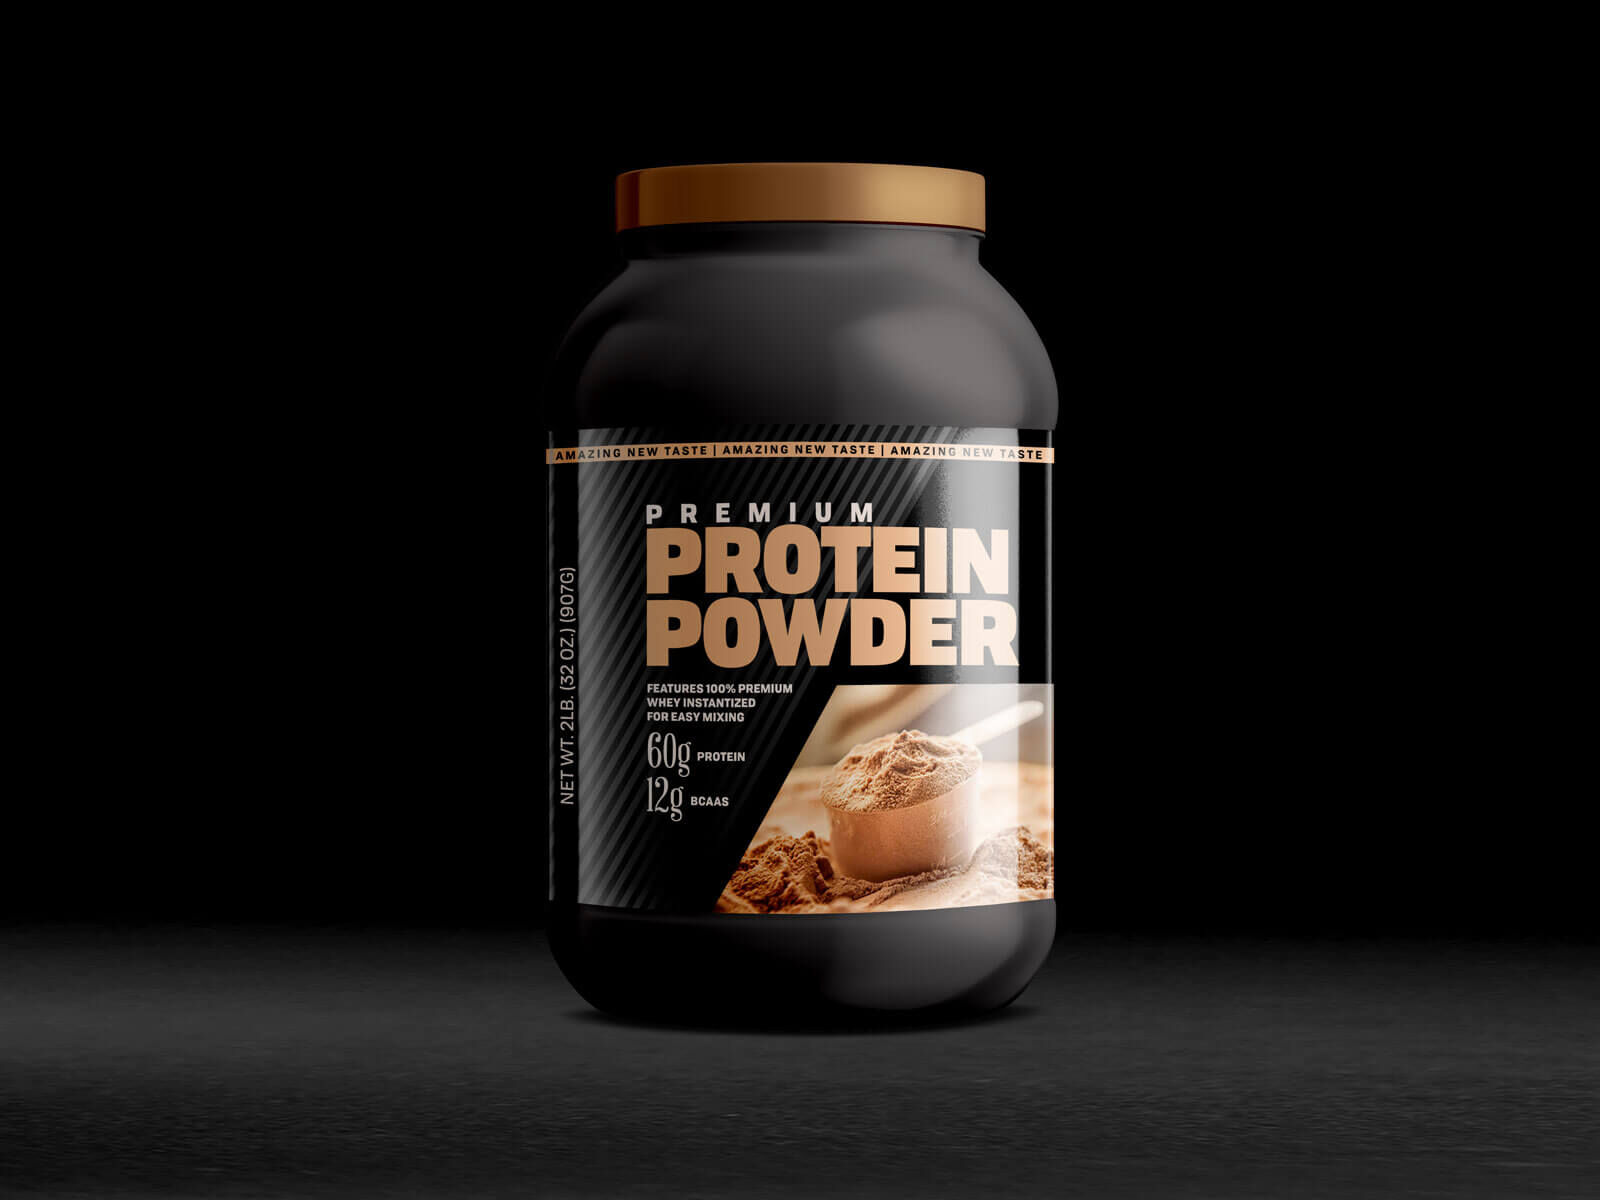 https://resourceboy.com/wp-content/uploads/2022/01/front-view-of-a-protein-powder-container-mockup-1.jpg